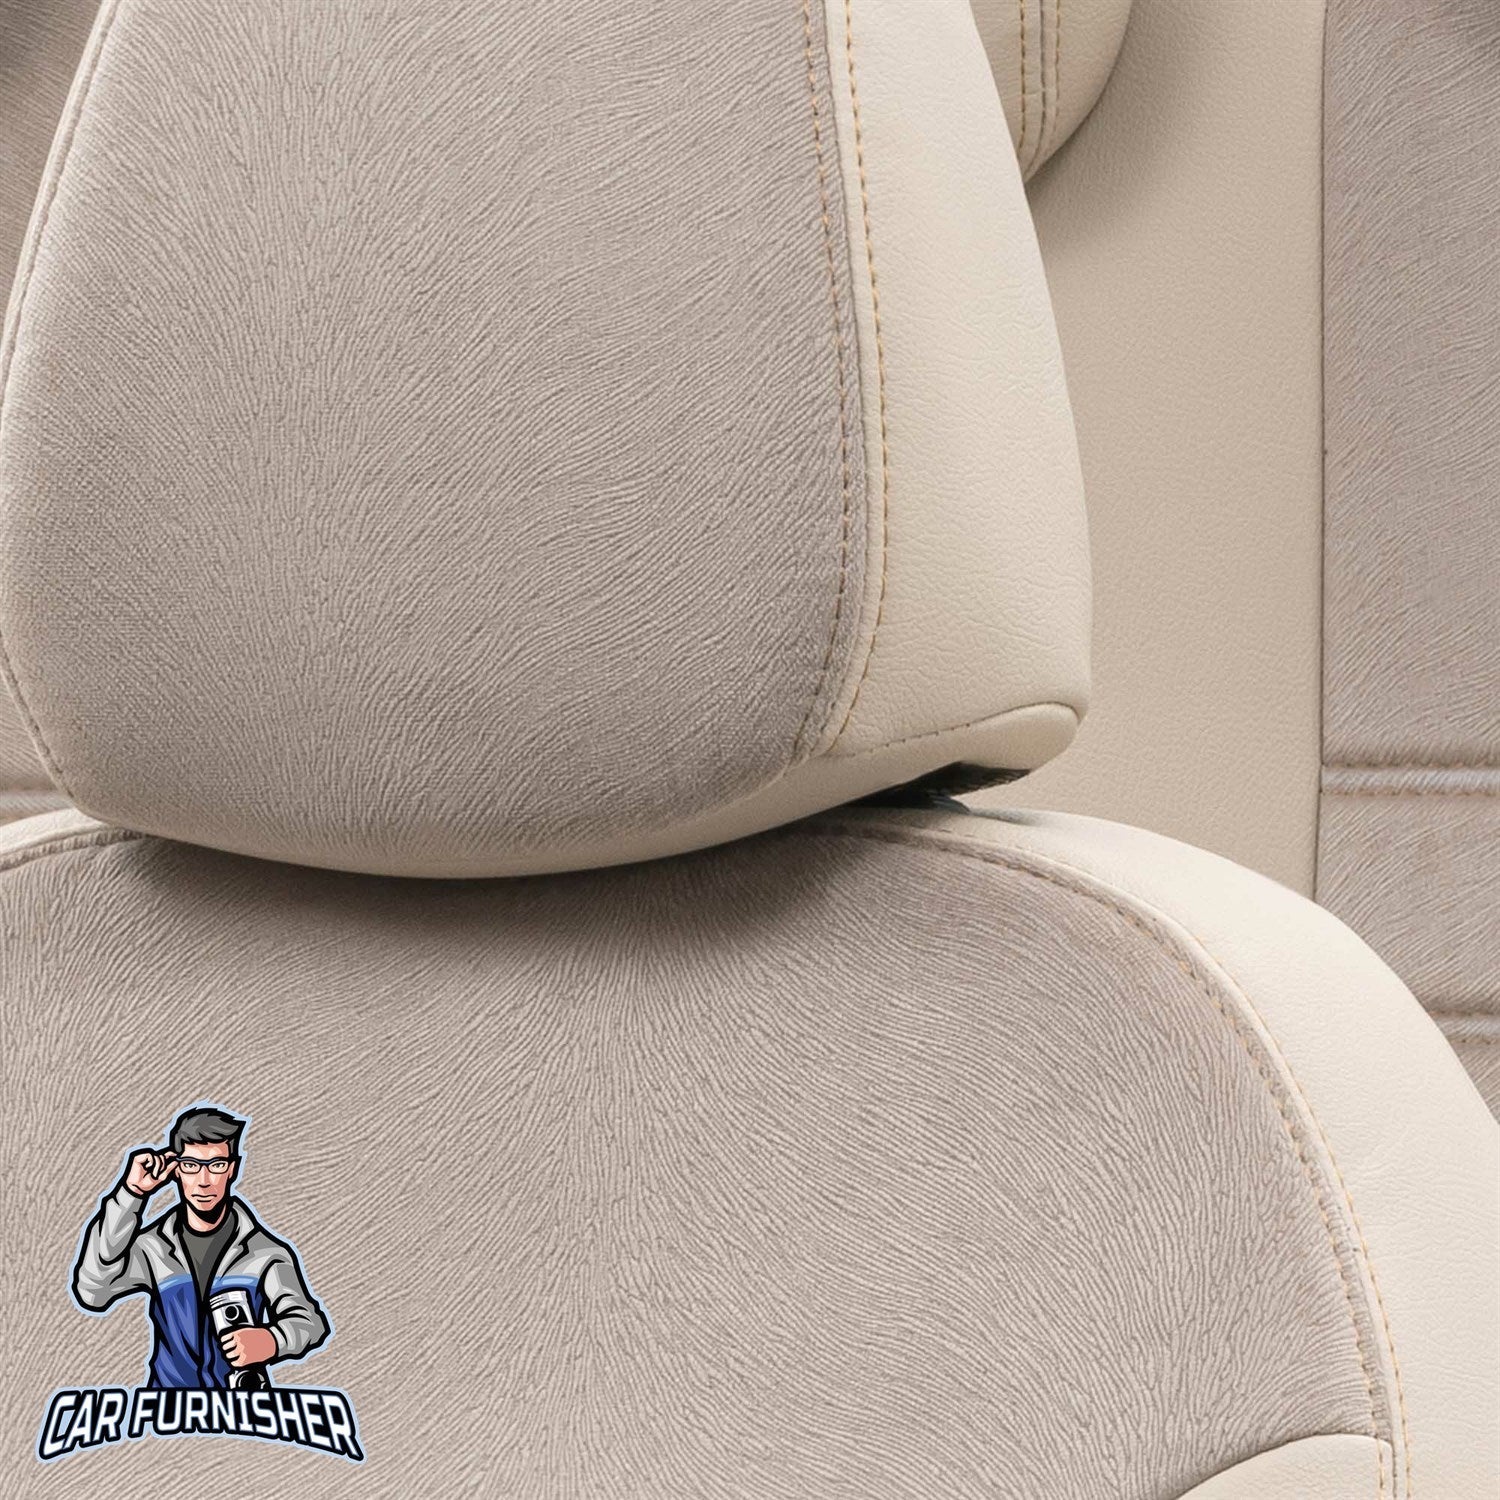 Seat Alhambra Seat Covers London Foal Feather Design Beige Leather & Foal Feather